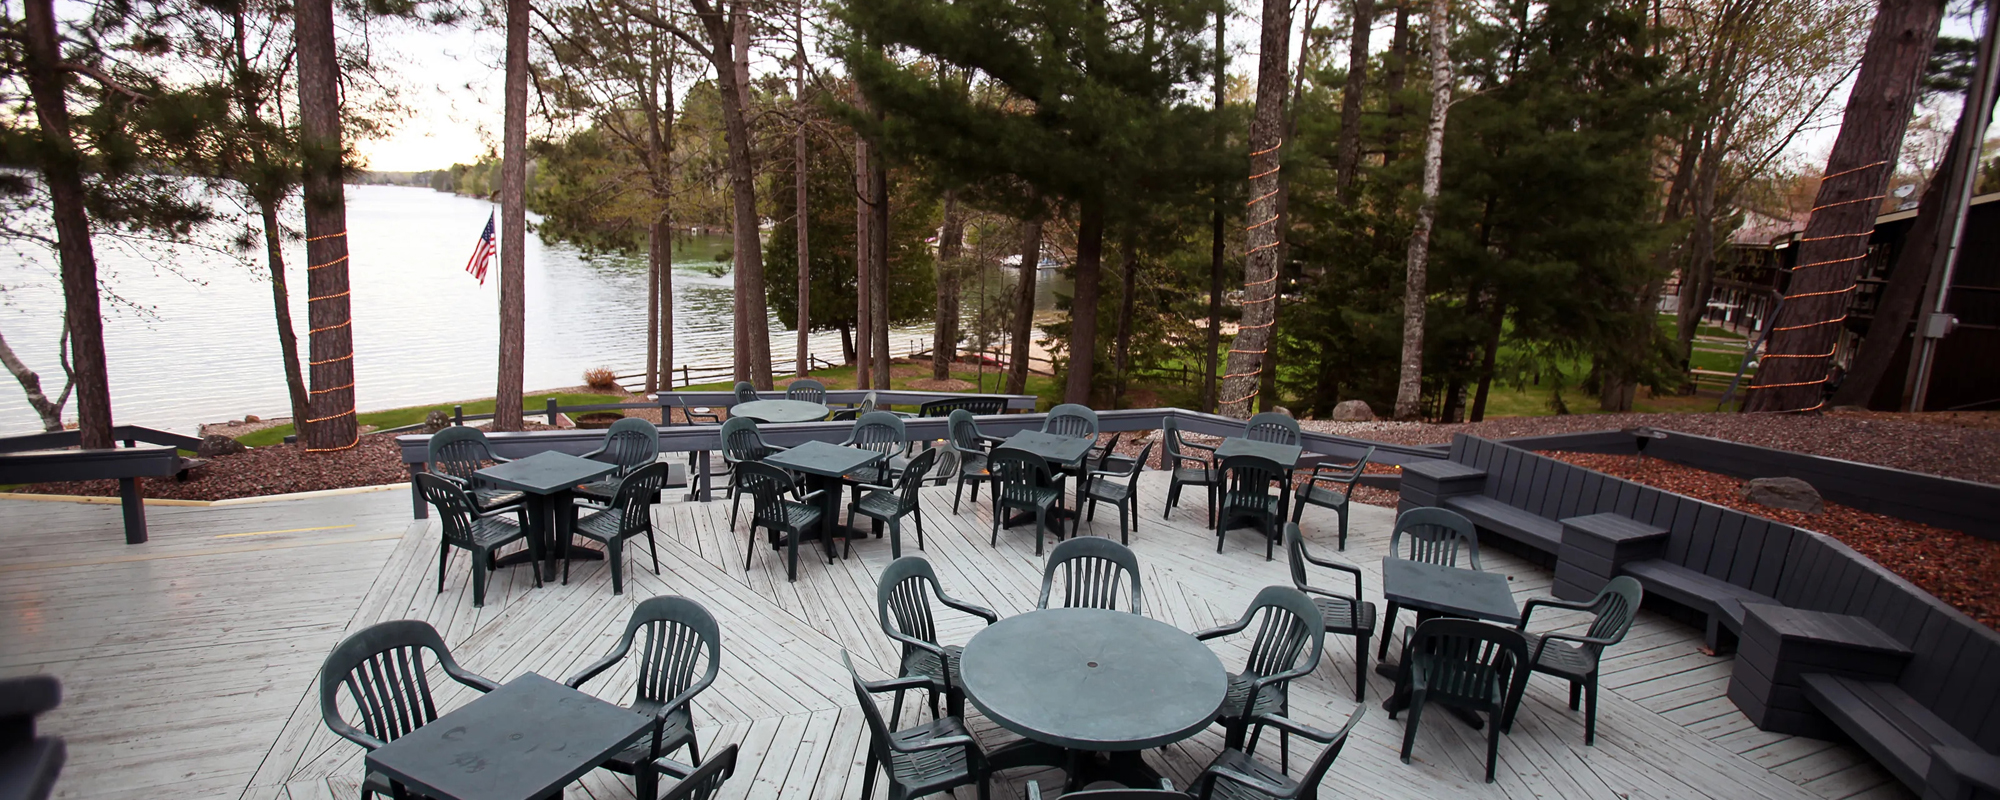 Patio seating on a beautiful deck overlooking a lake